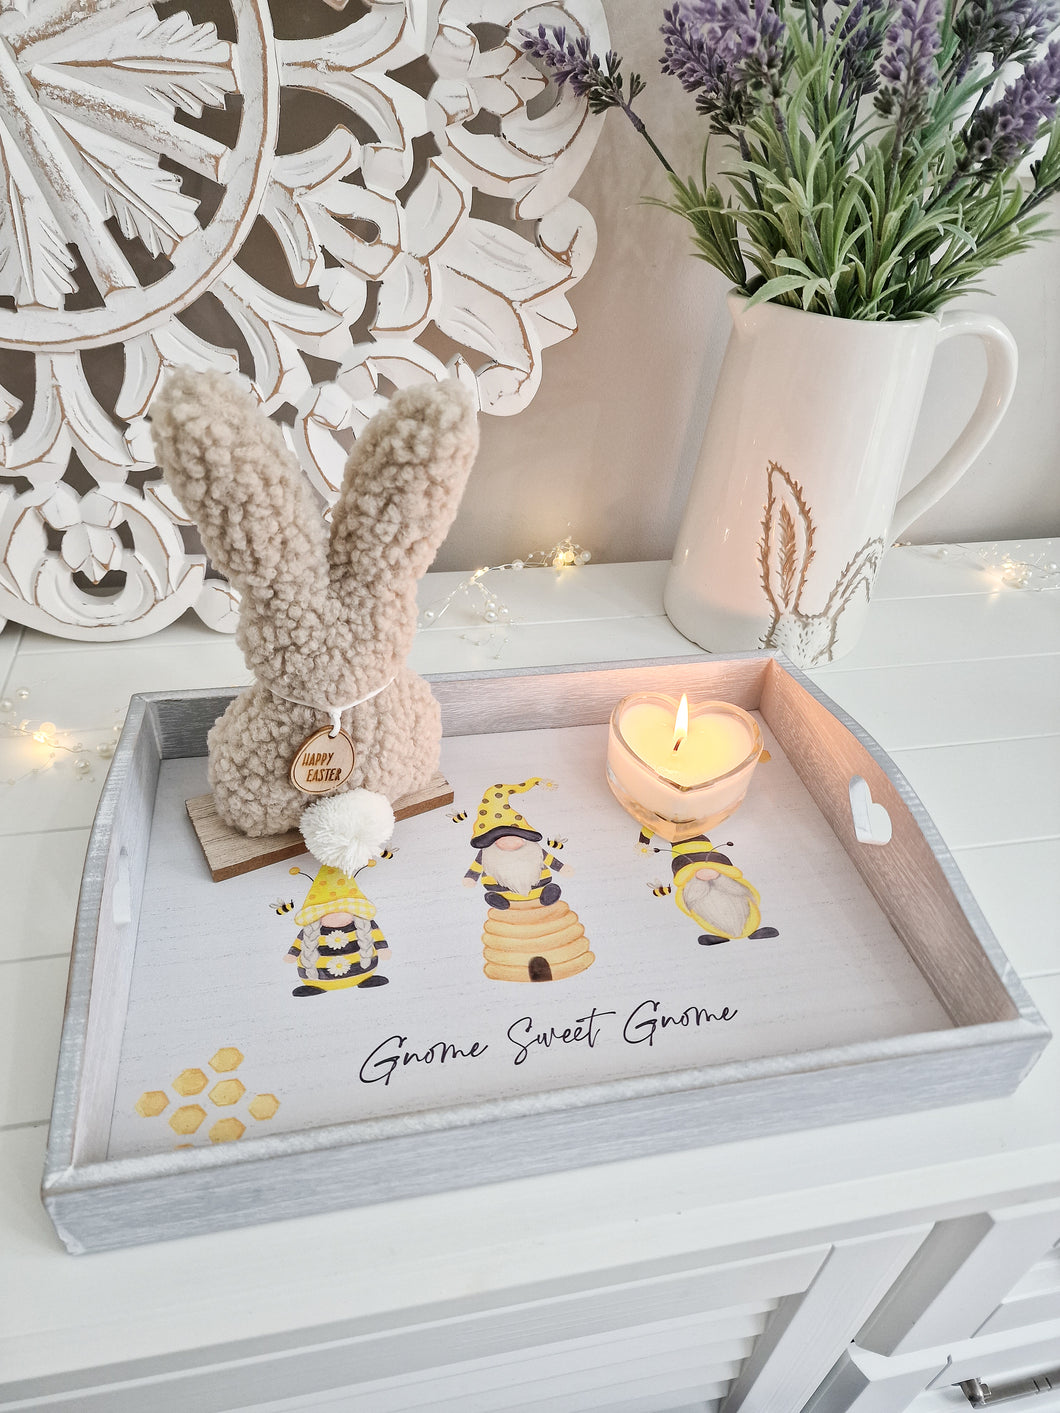 'Gnome Sweet Gnome' Bee Inspired Grey Heart Tray